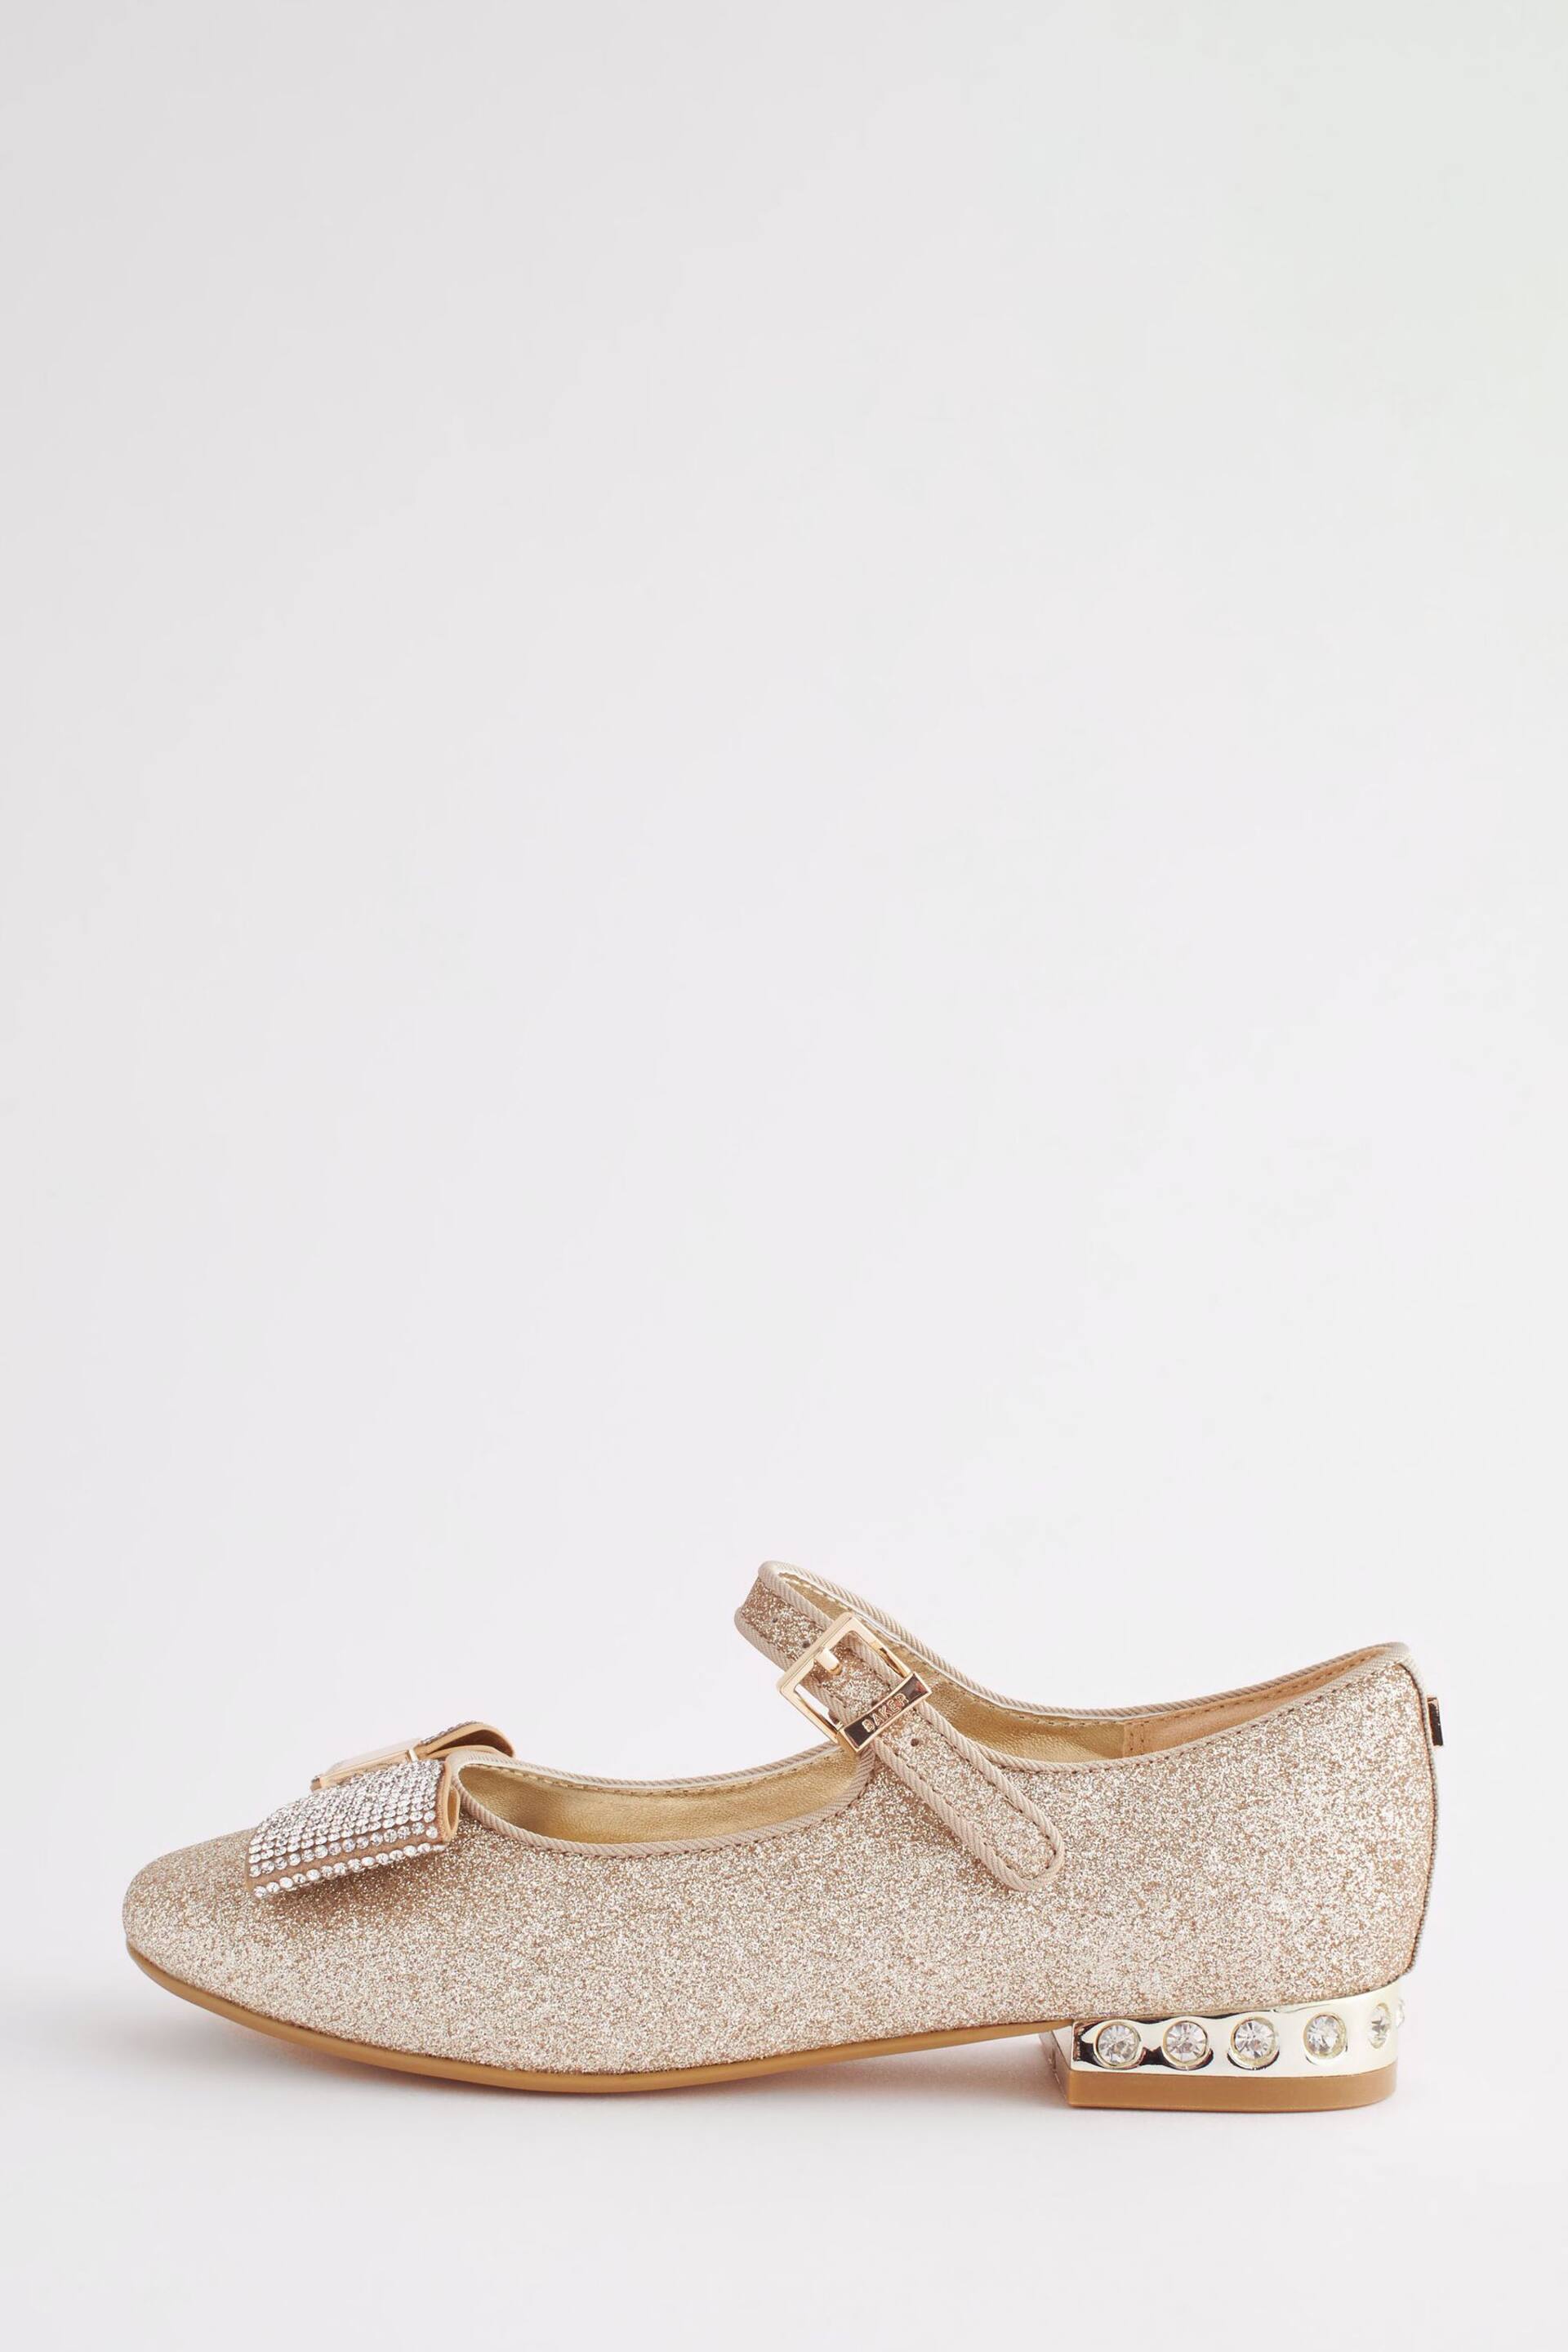 Baker by Ted Baker Girls Gold Glitter Shoes with Rhinestone Bow - Image 2 of 6